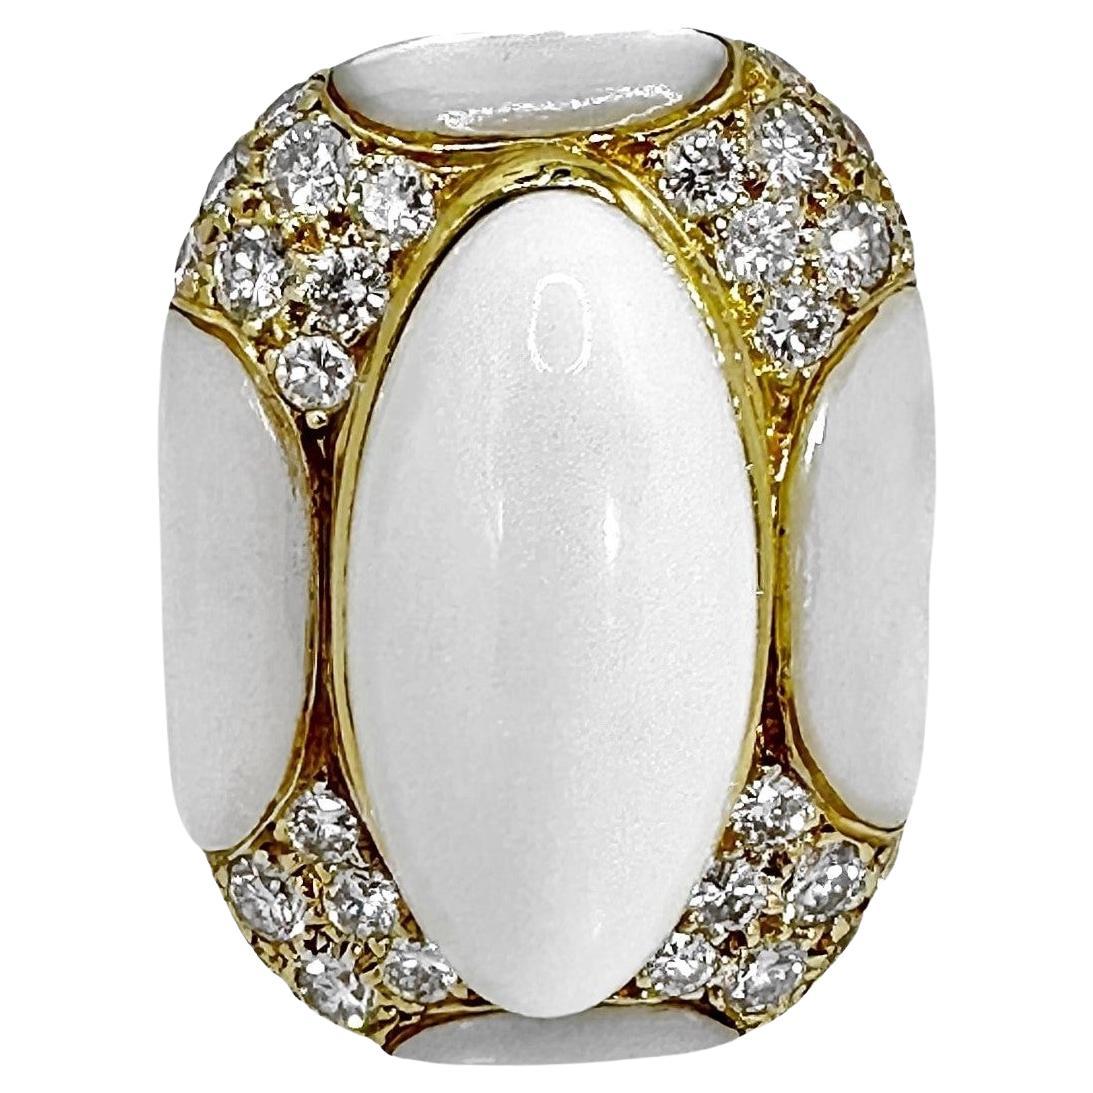 Outstanding 18k Yellow Gold, White Onyx, M.O.P. & Diamond Ring by Albert Lipten For Sale